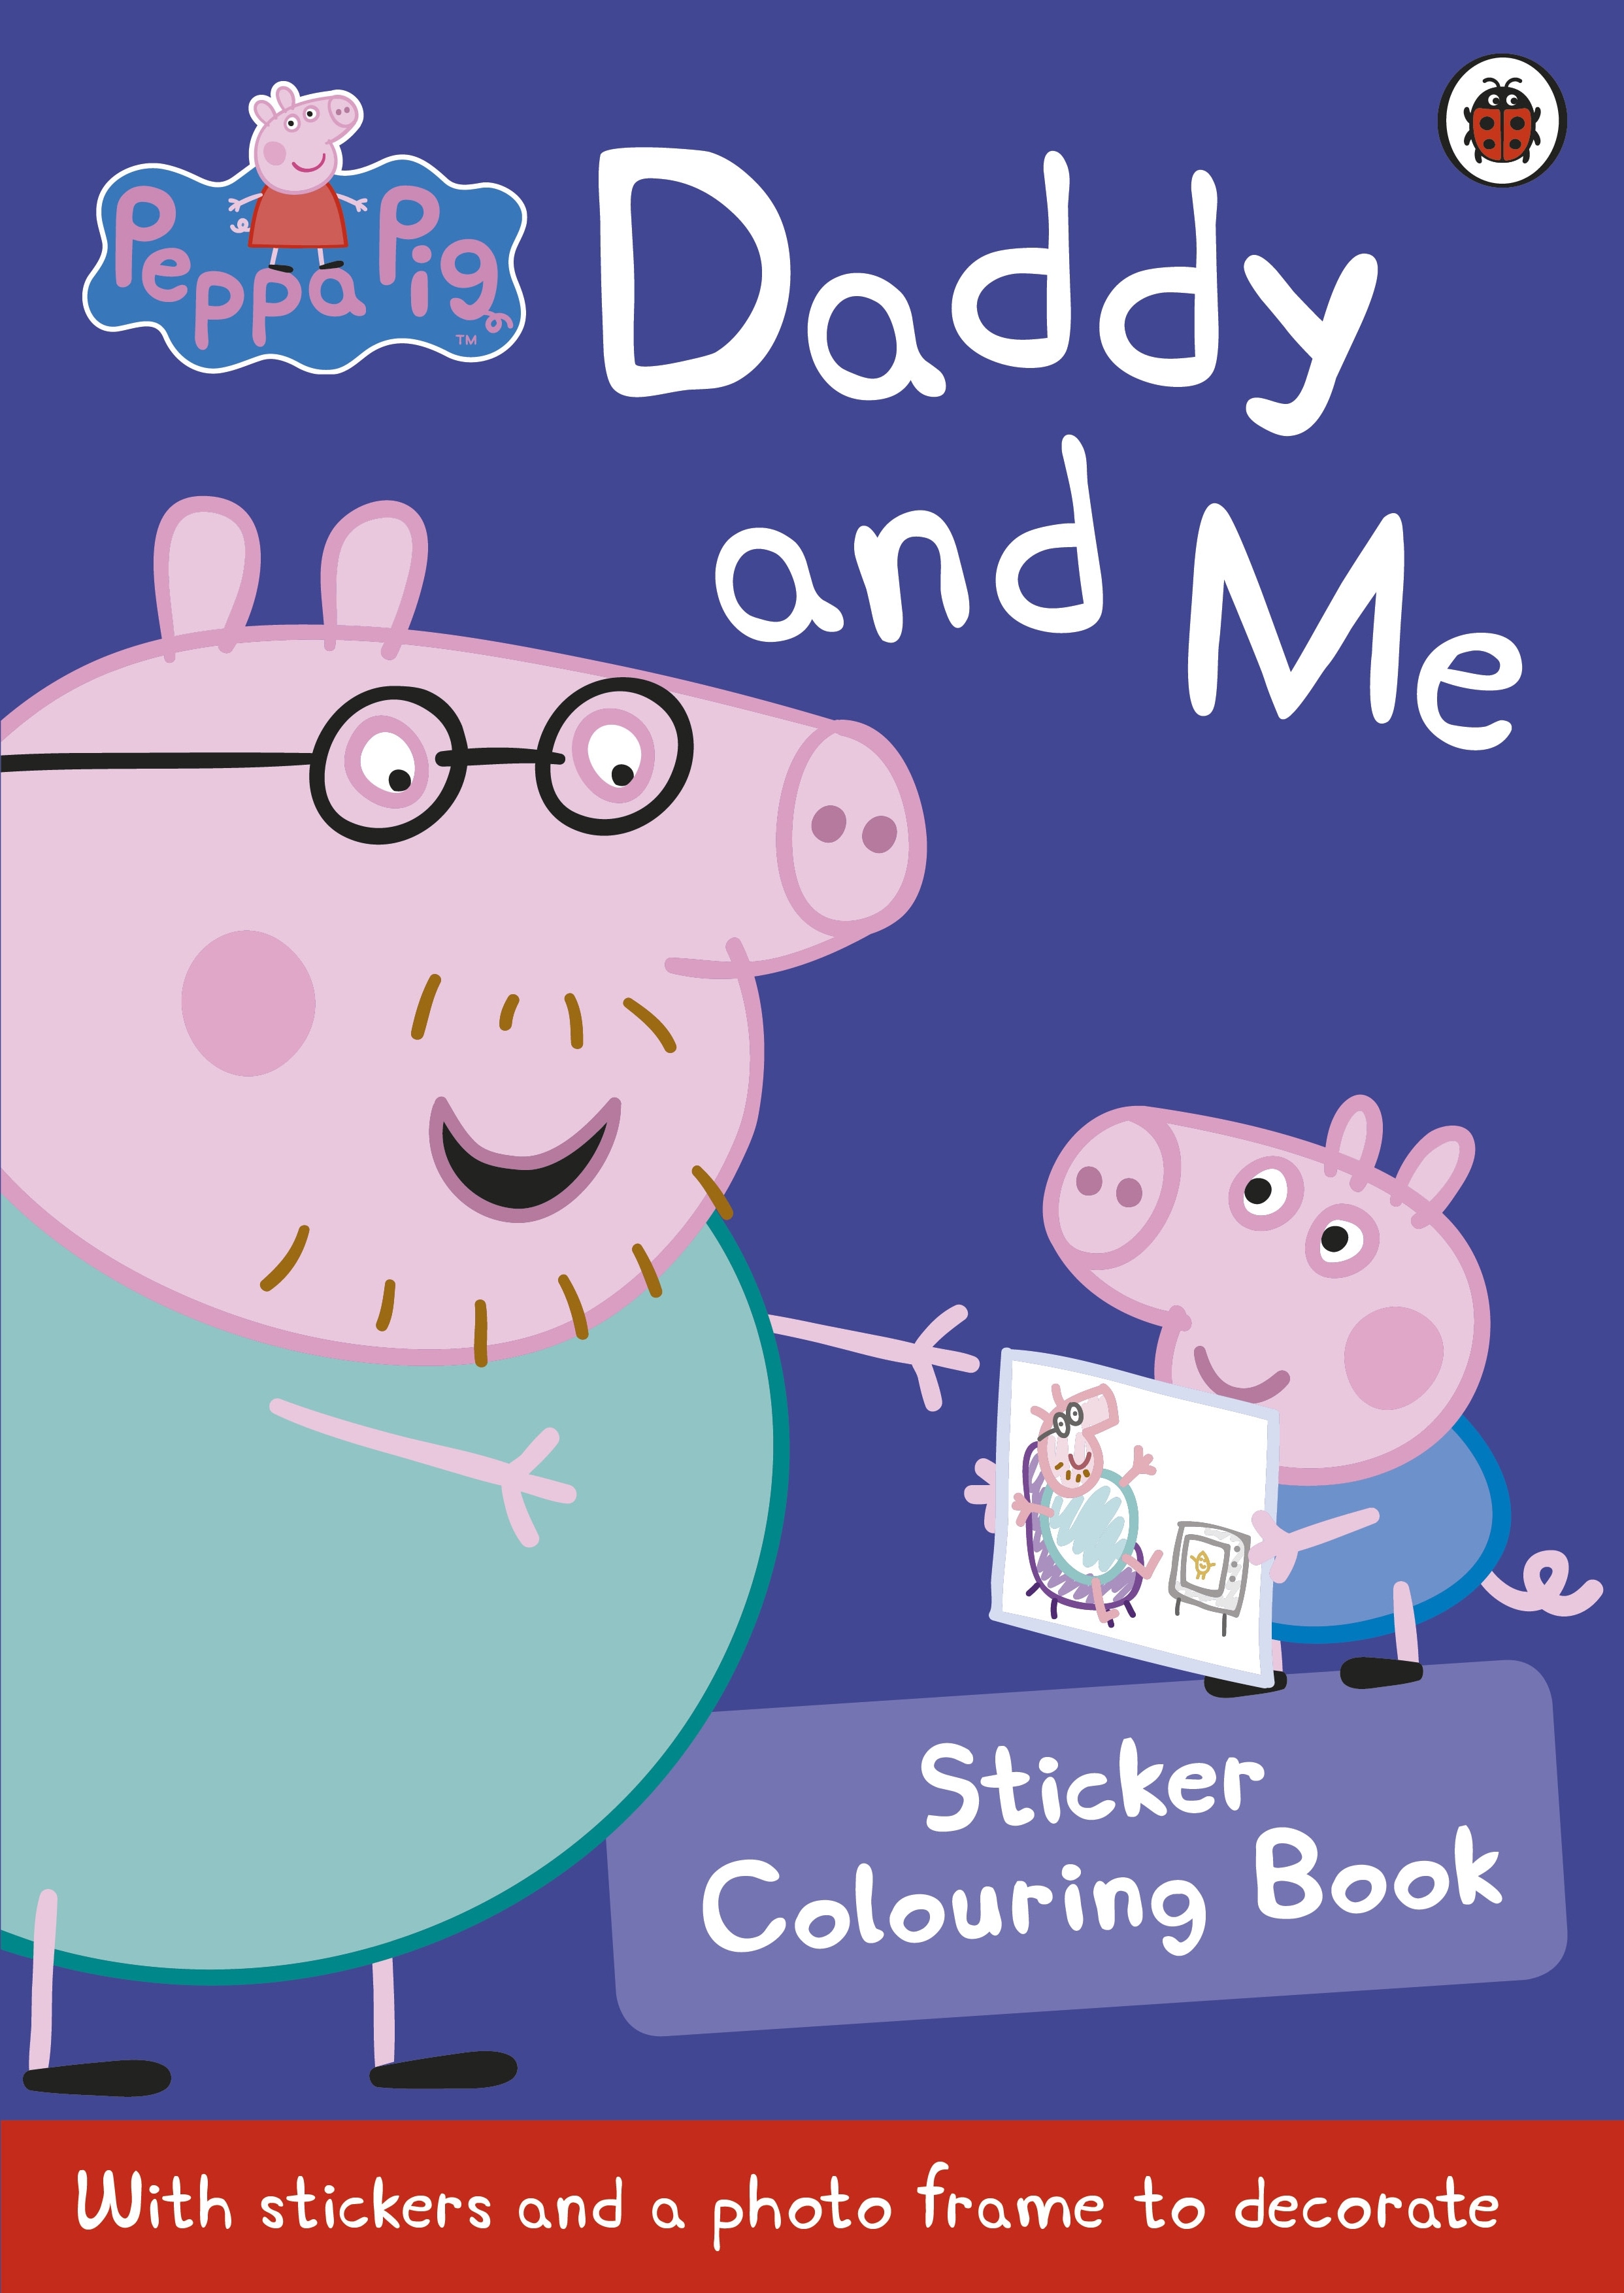 Book “Peppa Pig: Daddy and Me Sticker Colouring Book” by Peppa Pig — May 7, 2015